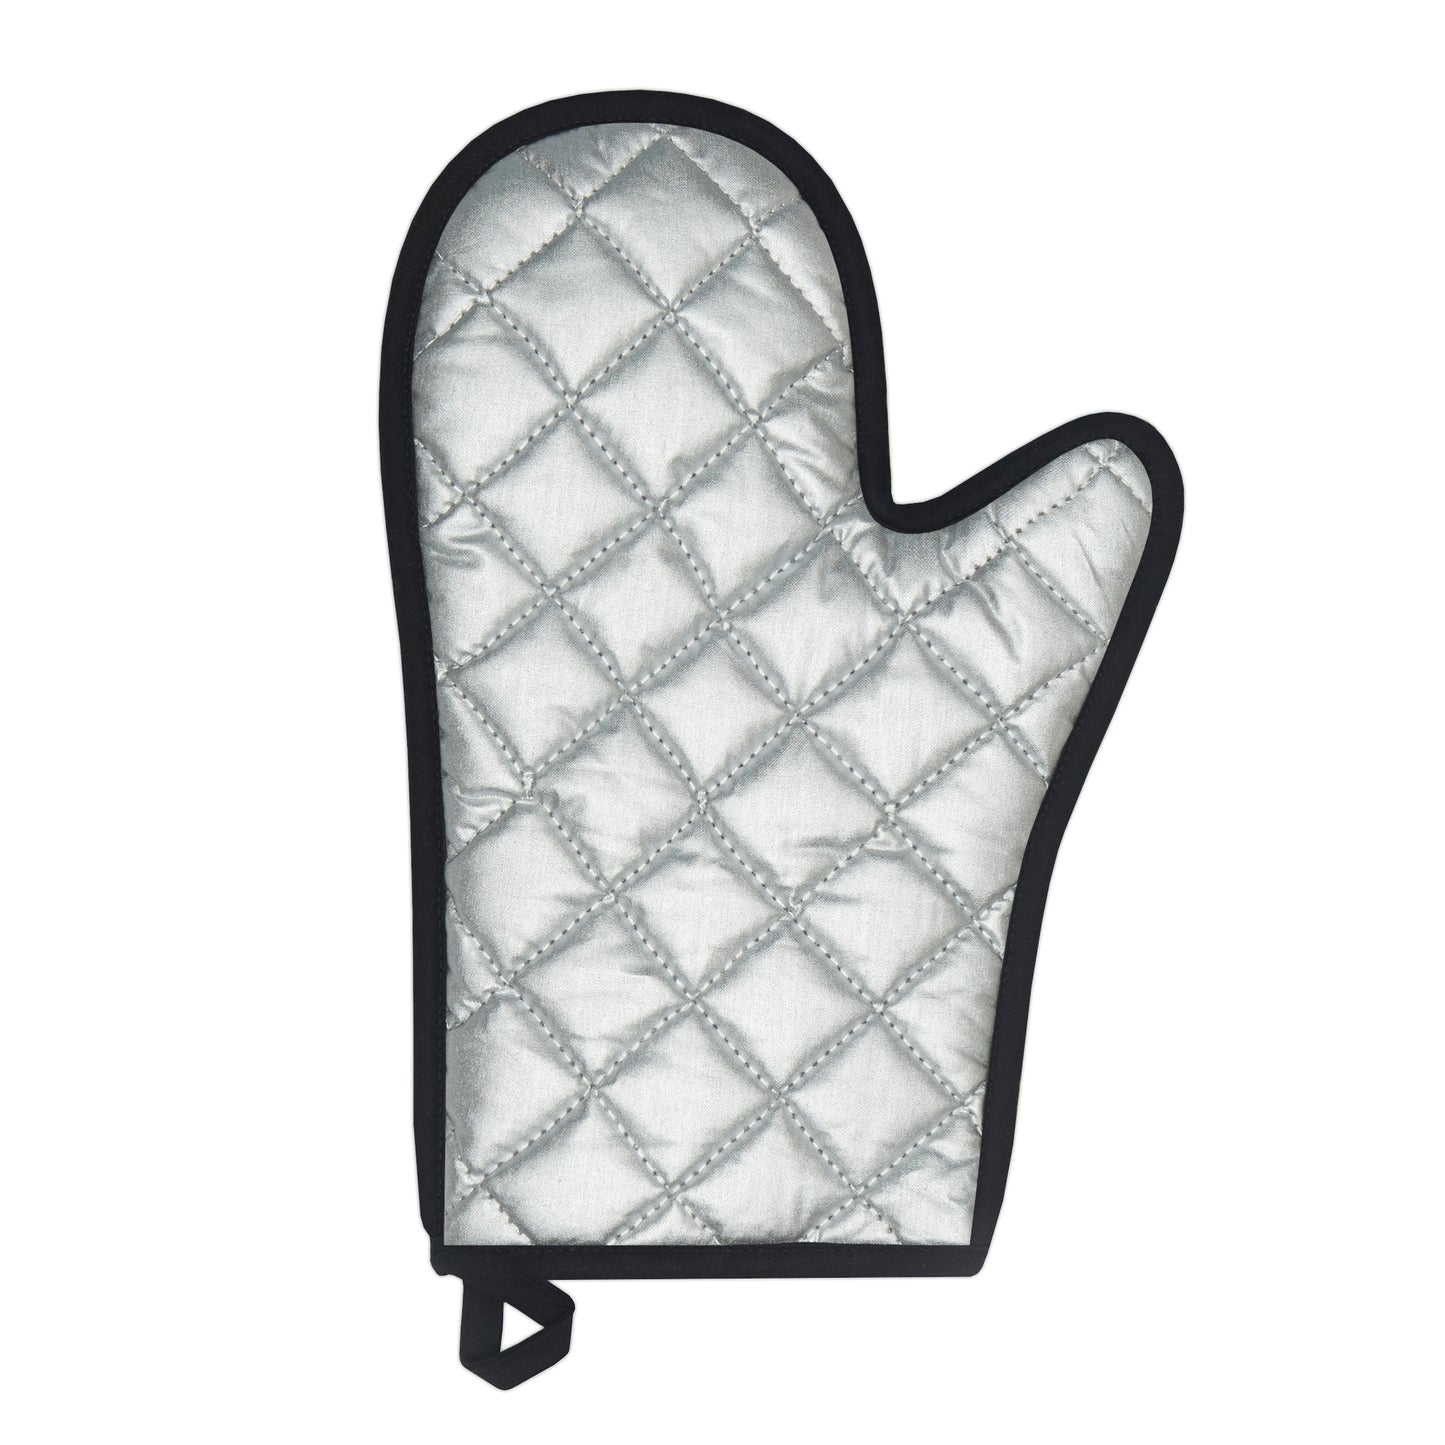 A Show of Hands Fabric Oven Glove